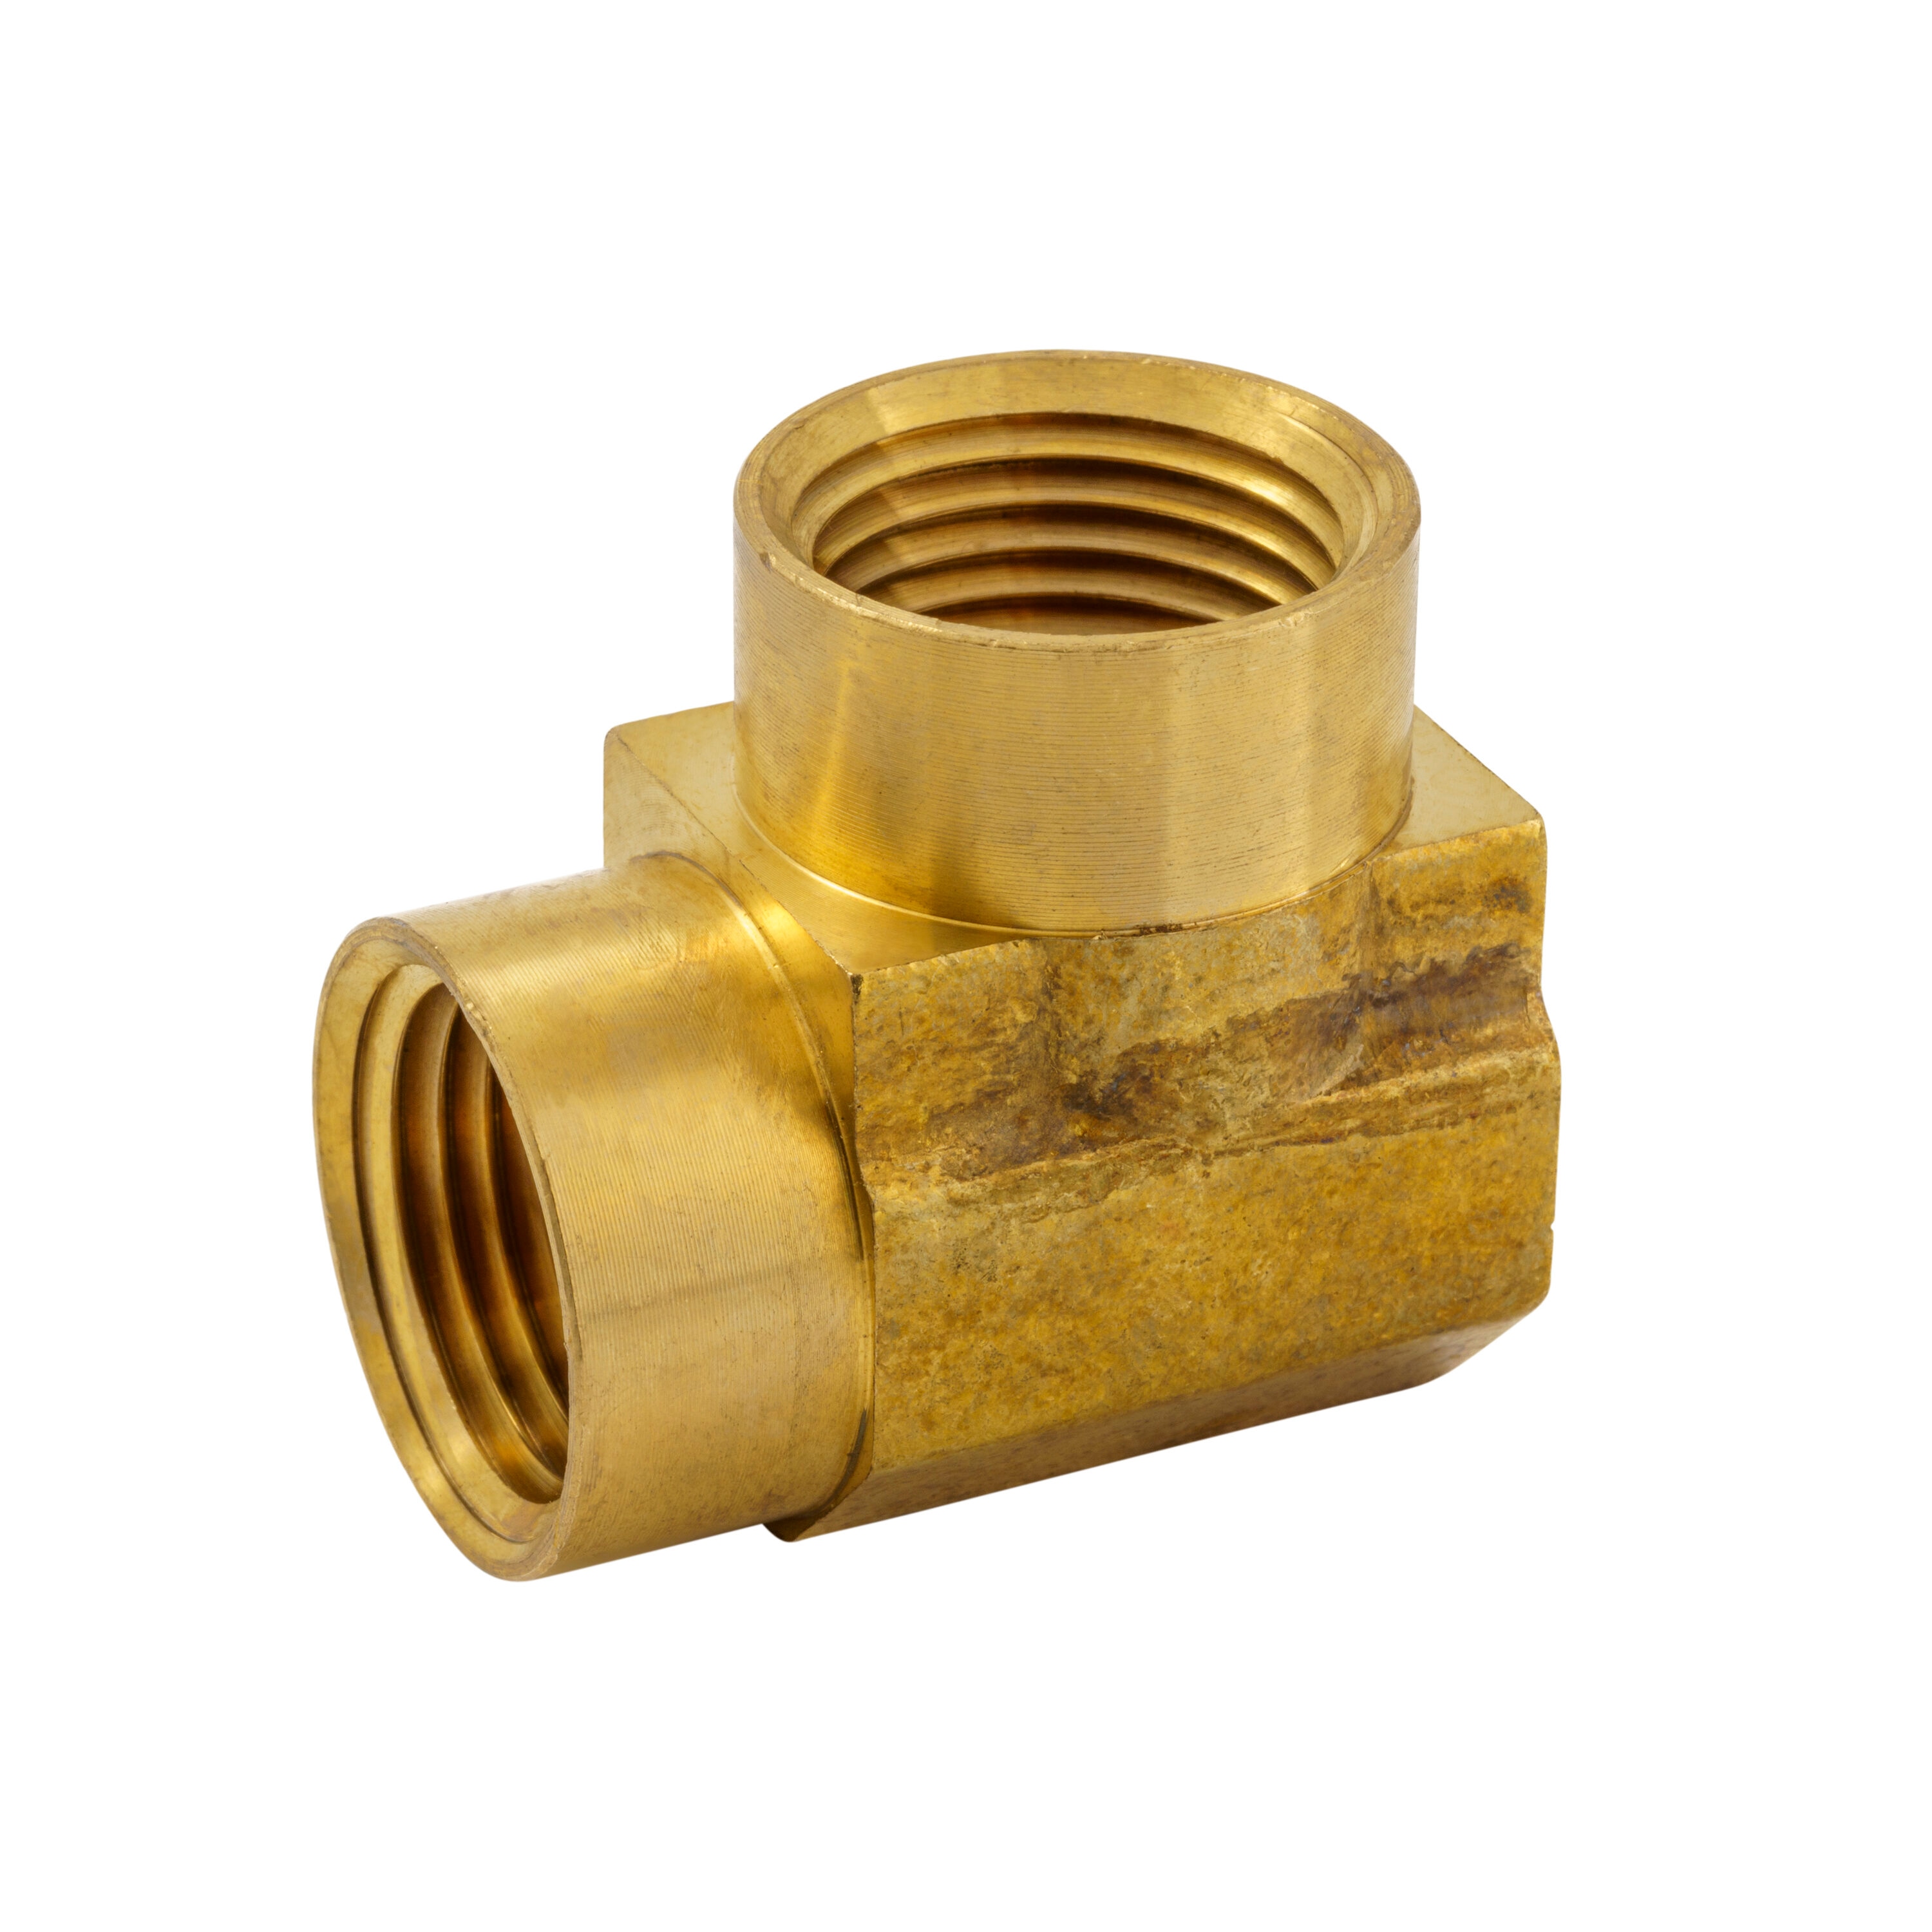 Proline Series 1/2-in x 1/2-in Threaded Female Elbow Fitting in